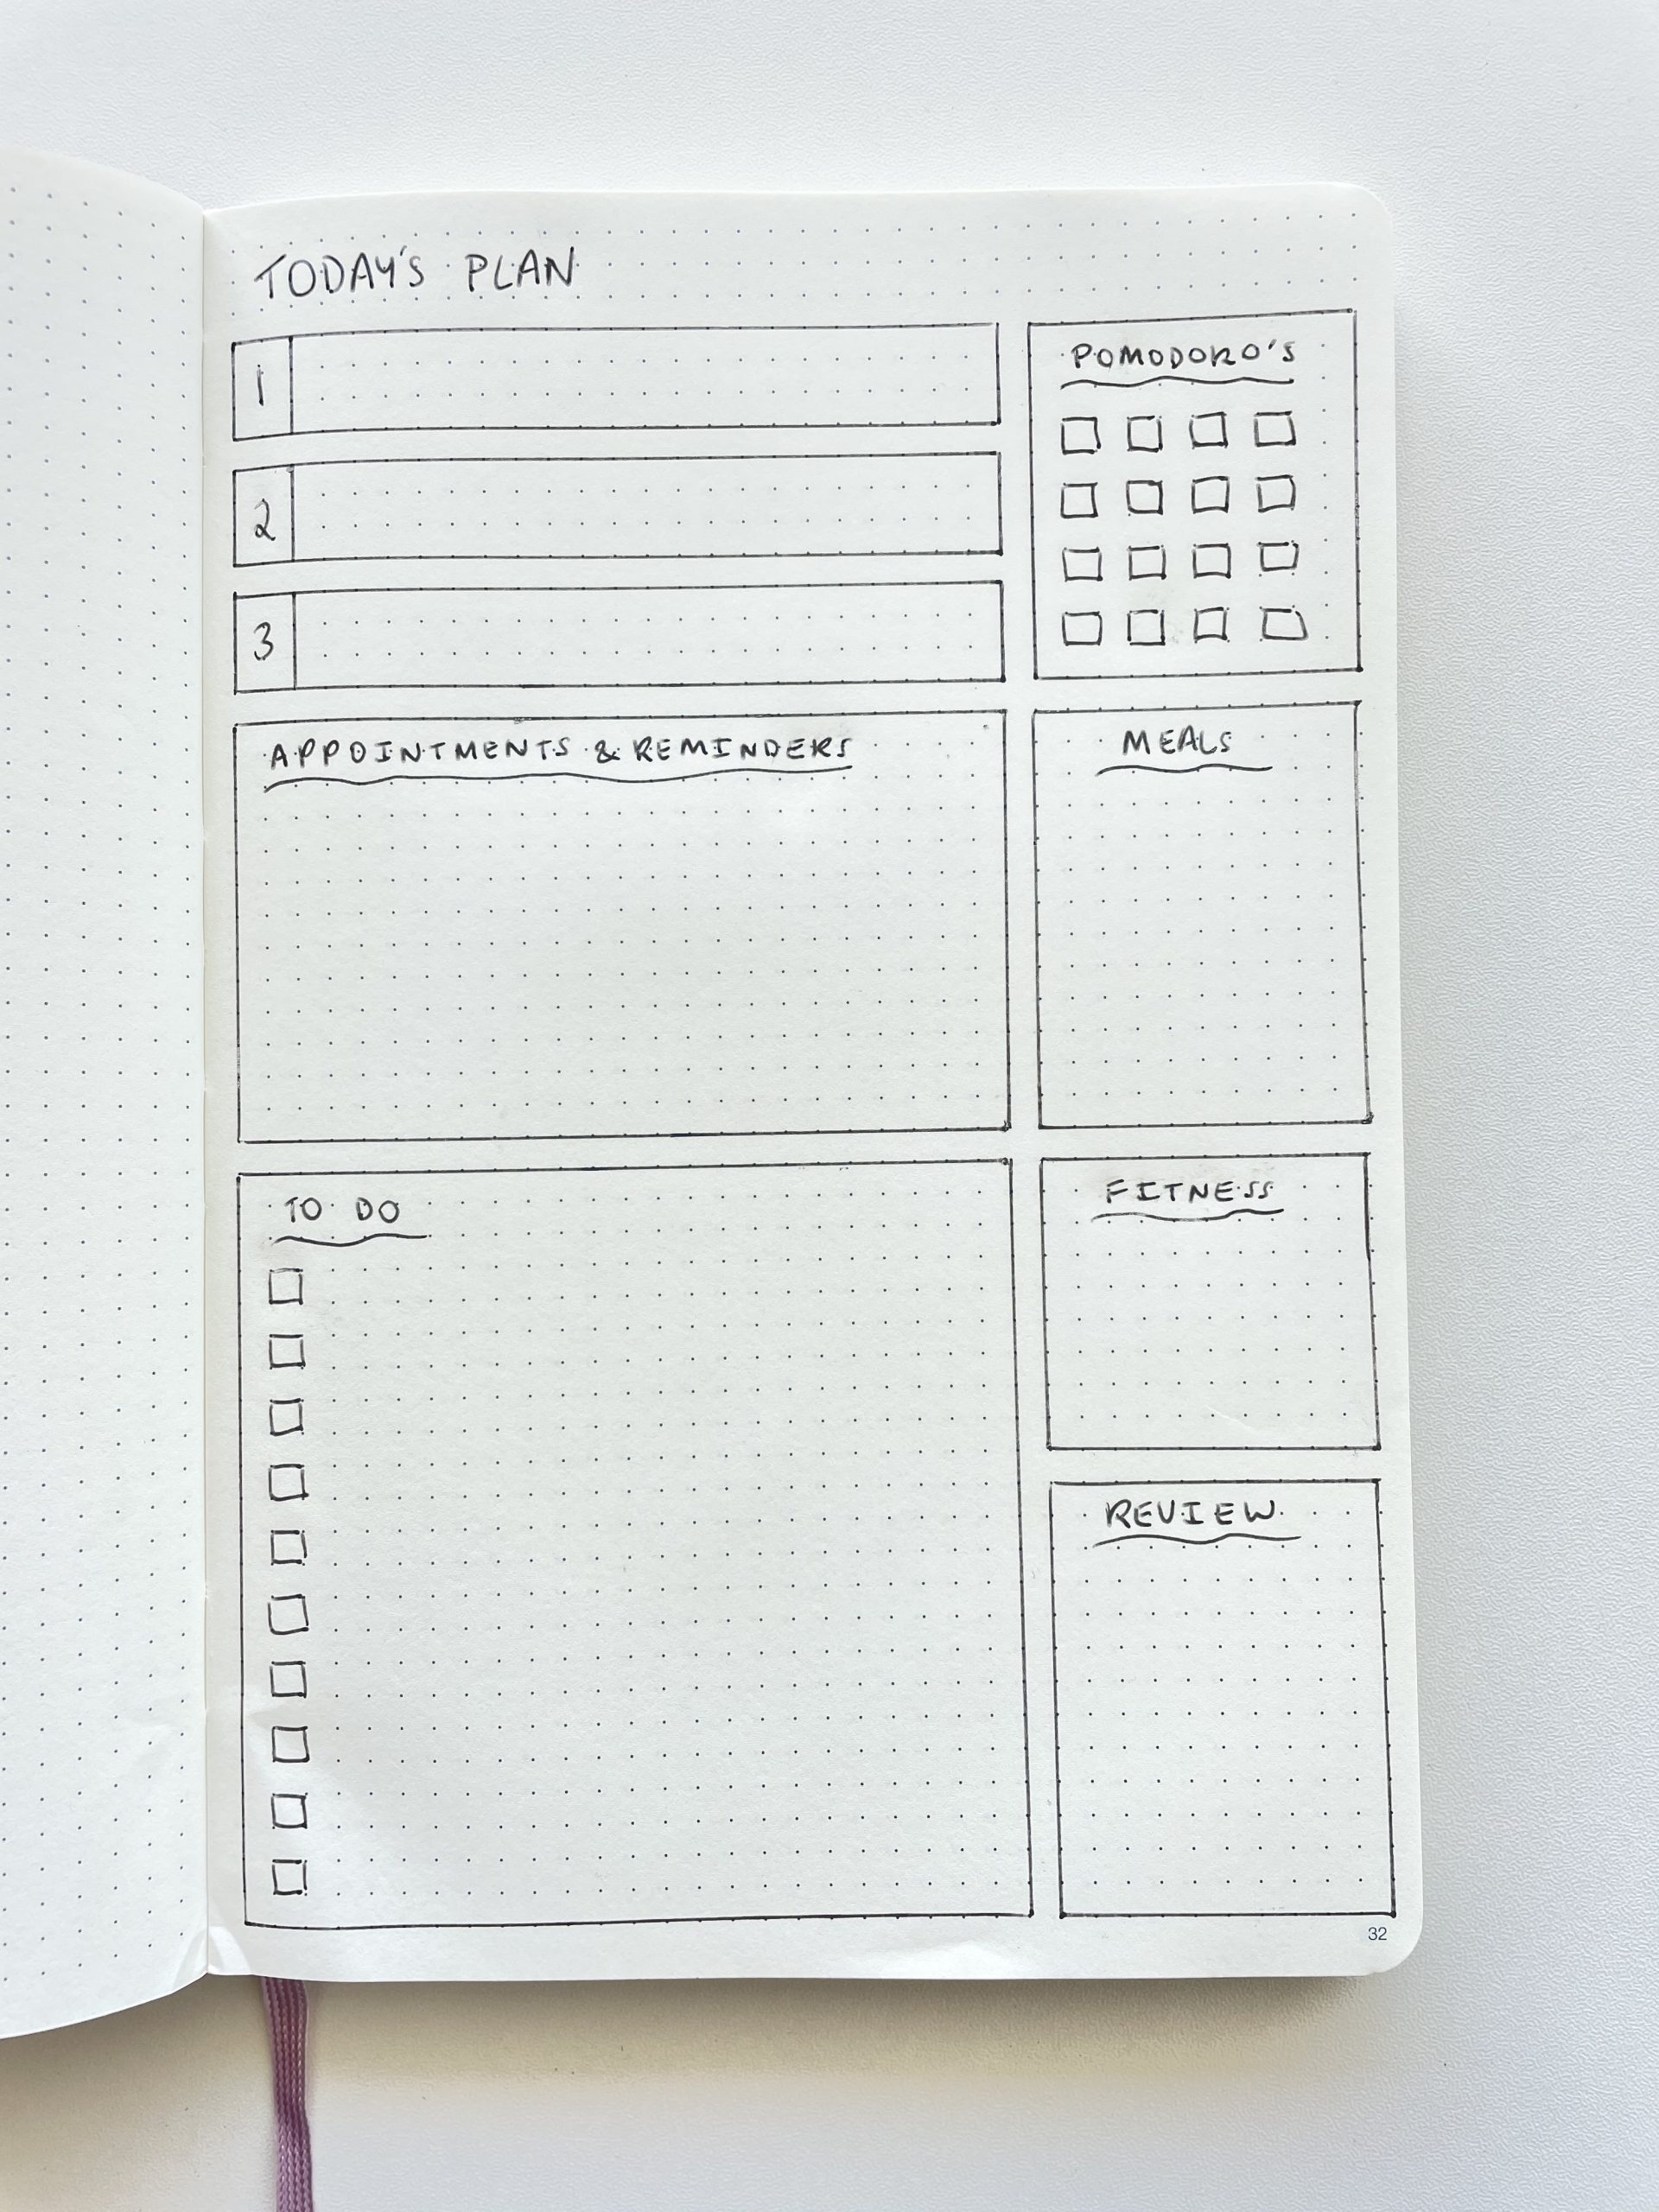 daily bujo spread todays plan meals review to do appointments pomodoro focus time bullet journal all about planners